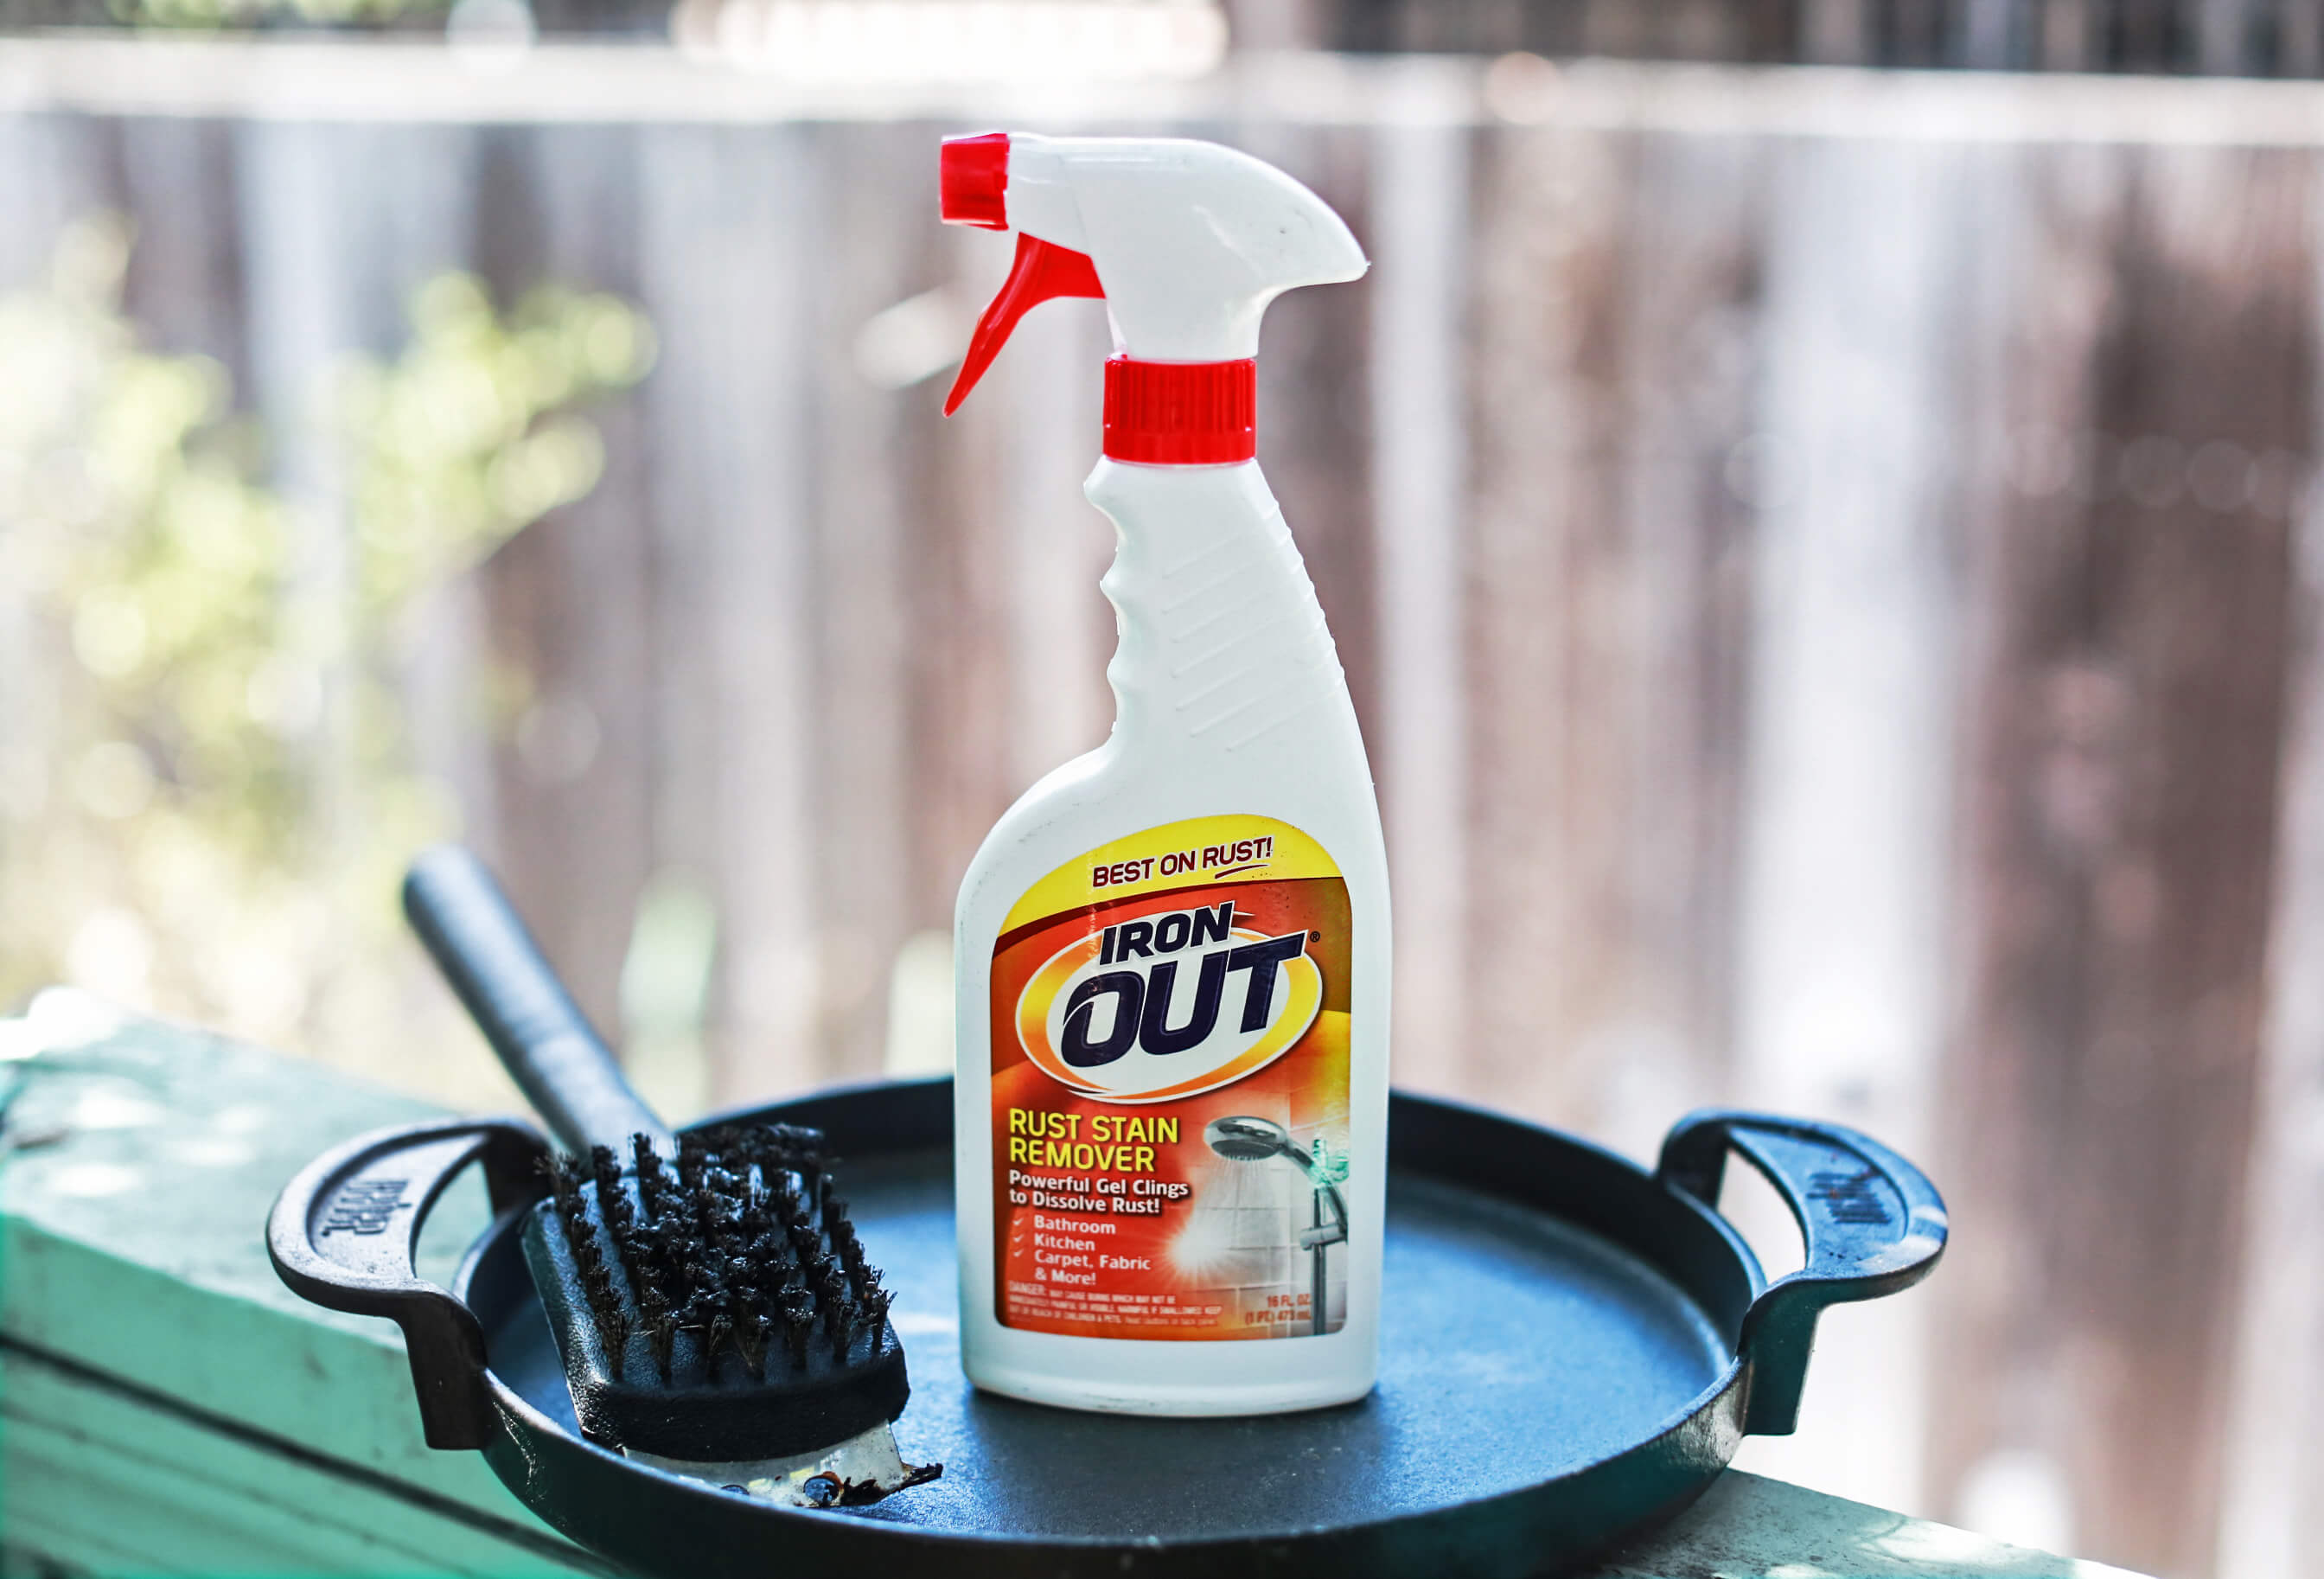 WHAT TO DO WHEN AN IRON REMOVER STAINS YOUR PAINTIRON REMOVER GONE  BADEASY FIX! 